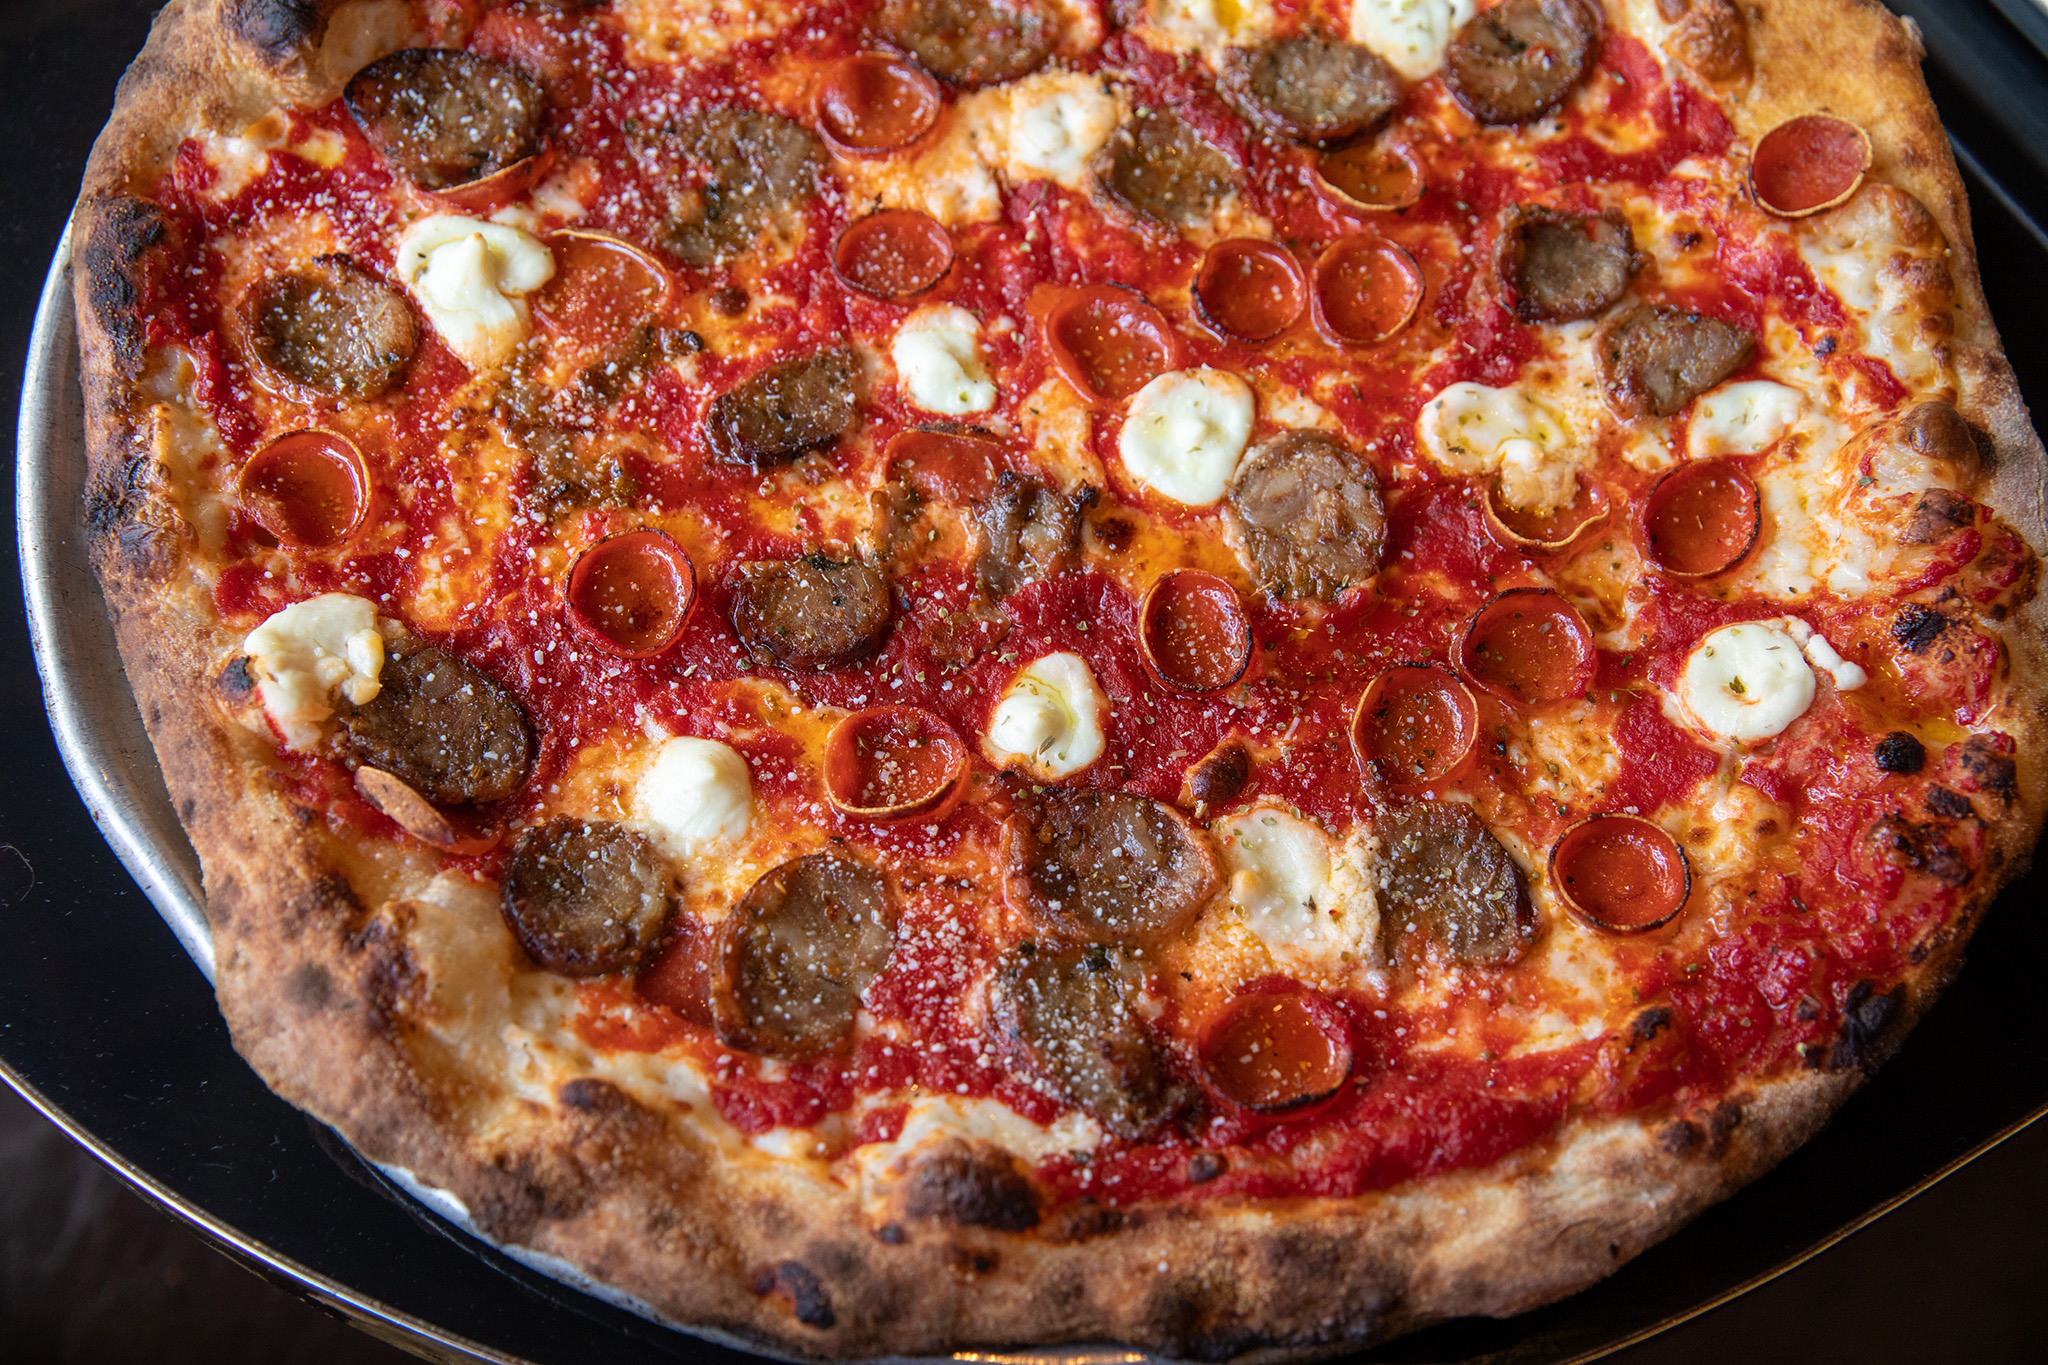 San Francisco’s Unique Spot on the World’s High Pizzerias Record